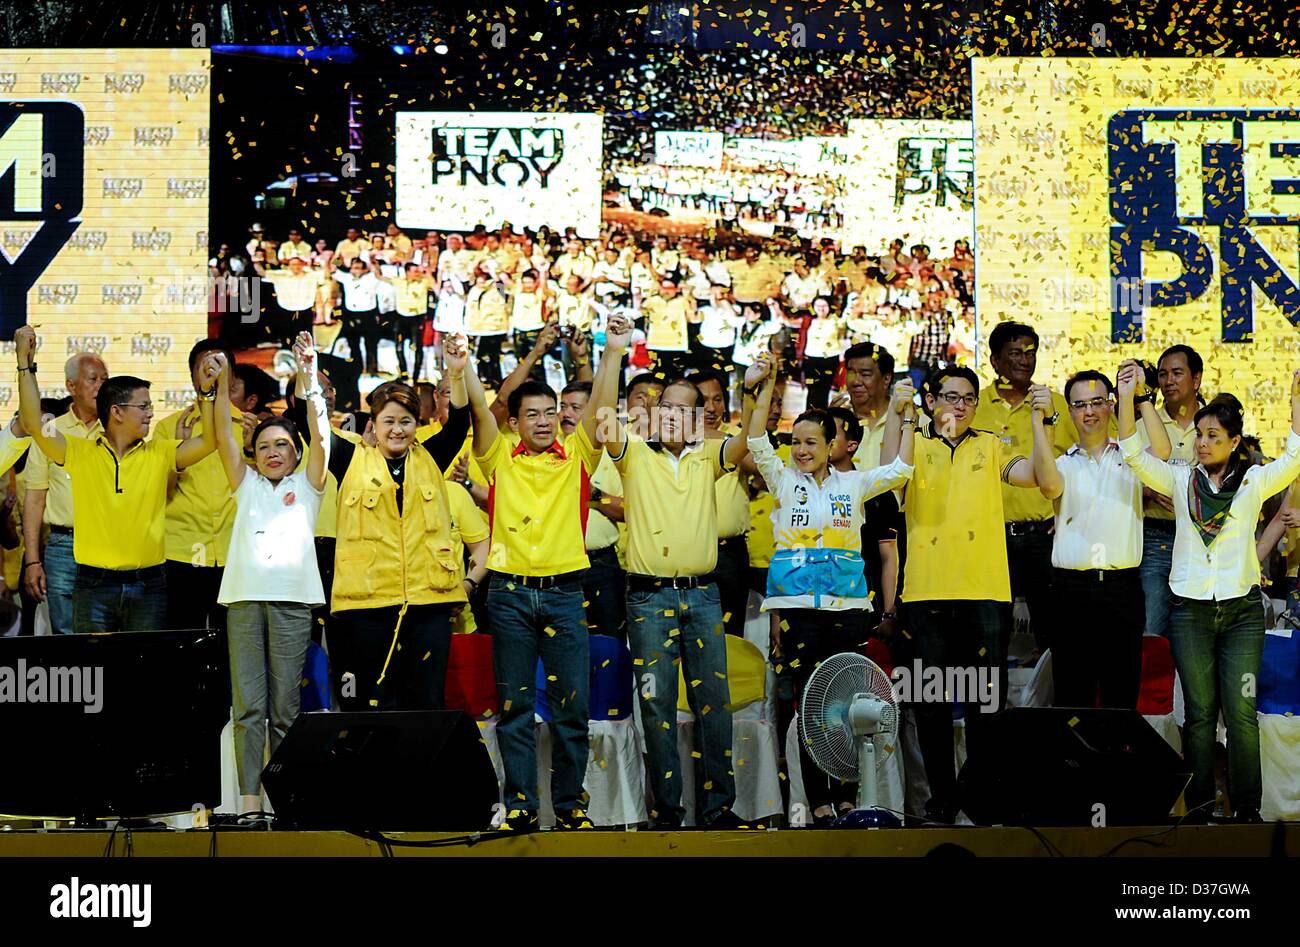 Manila, Philippines. 12th February 2013. Administration senatorial candidates together with Philippine President BENIGNO AQUINO III hold up their hands during a proclamation rally for their slate in the May congressional and local election in Manila, 12 February 2013. Senatorial candidates for the May 13 midterm elections kicked off their campaigns as the official start of the campaign period for national positions started. The campaign season is slated from February 12 to May 11, 2013. � Credit: Ezra Acayan / Alamy Live News Stock Photo